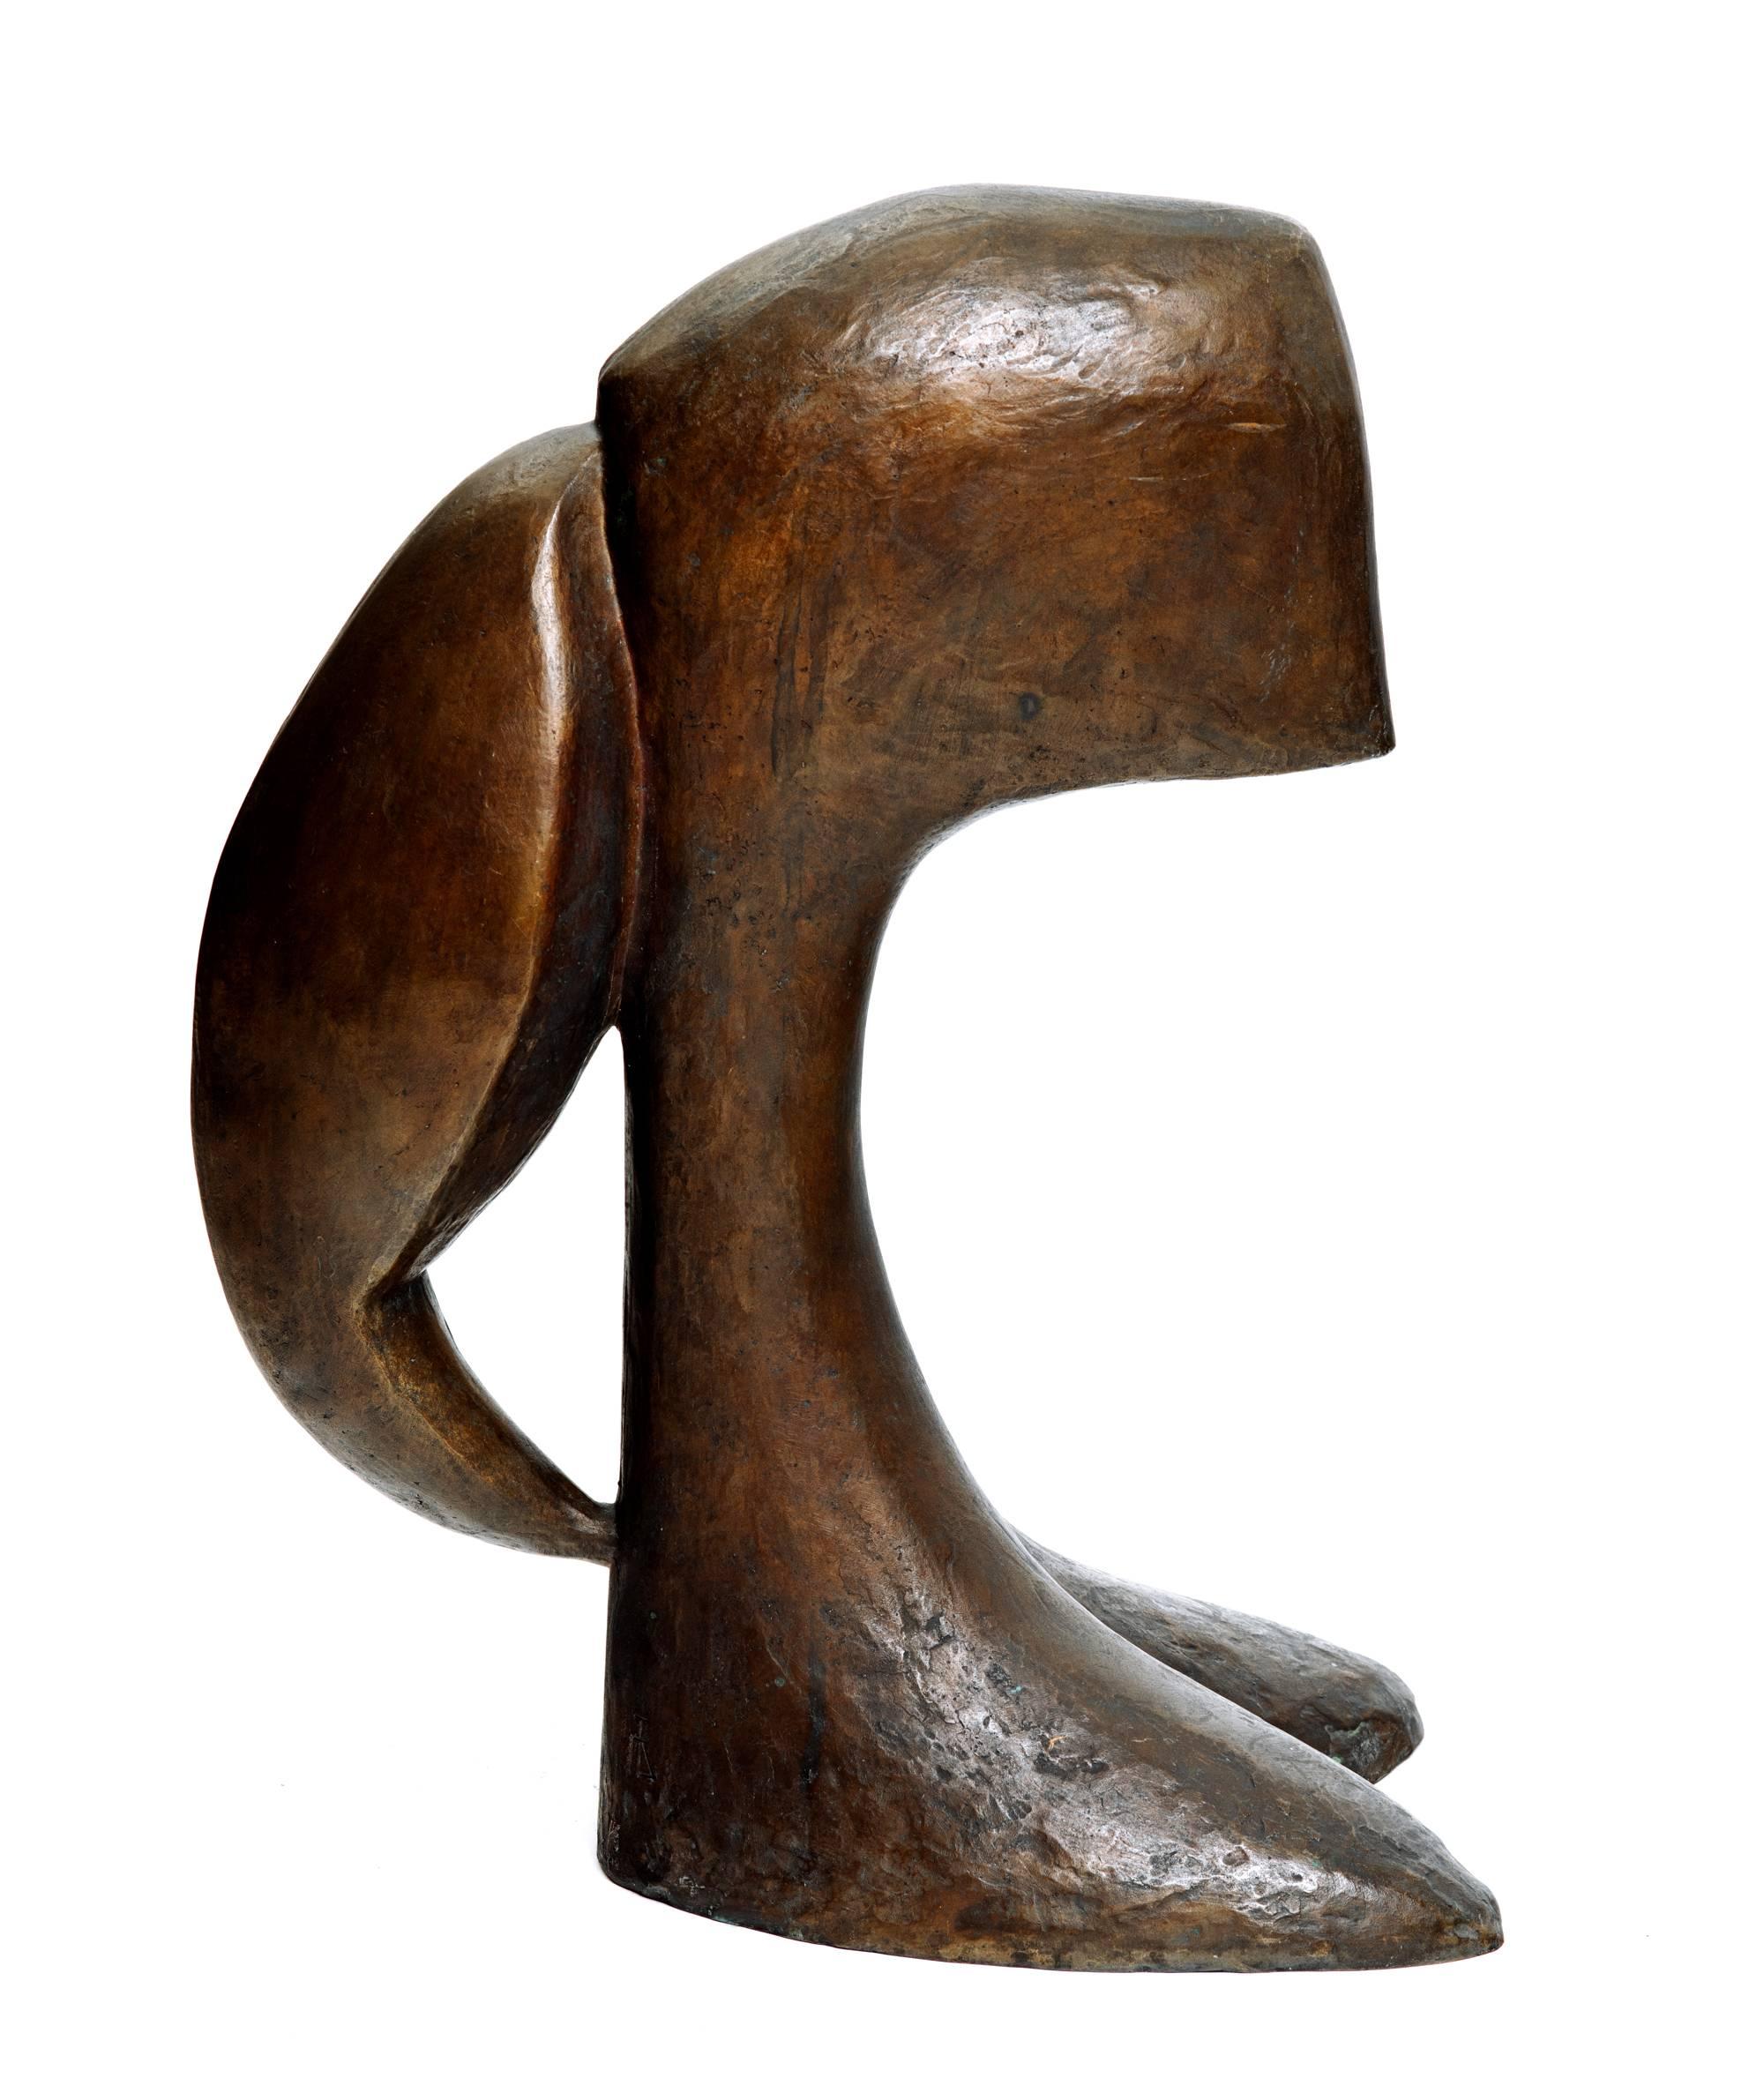 Rare and important figural bronze abstract sculpture, Claire, by Maxime Adam-Tessier (1920-2000) circa 1960s. Her unique bust is atypical of his work. Signed with a monogram and marked Susse Fondeur Paris, this is number 4 out of an edition of 6